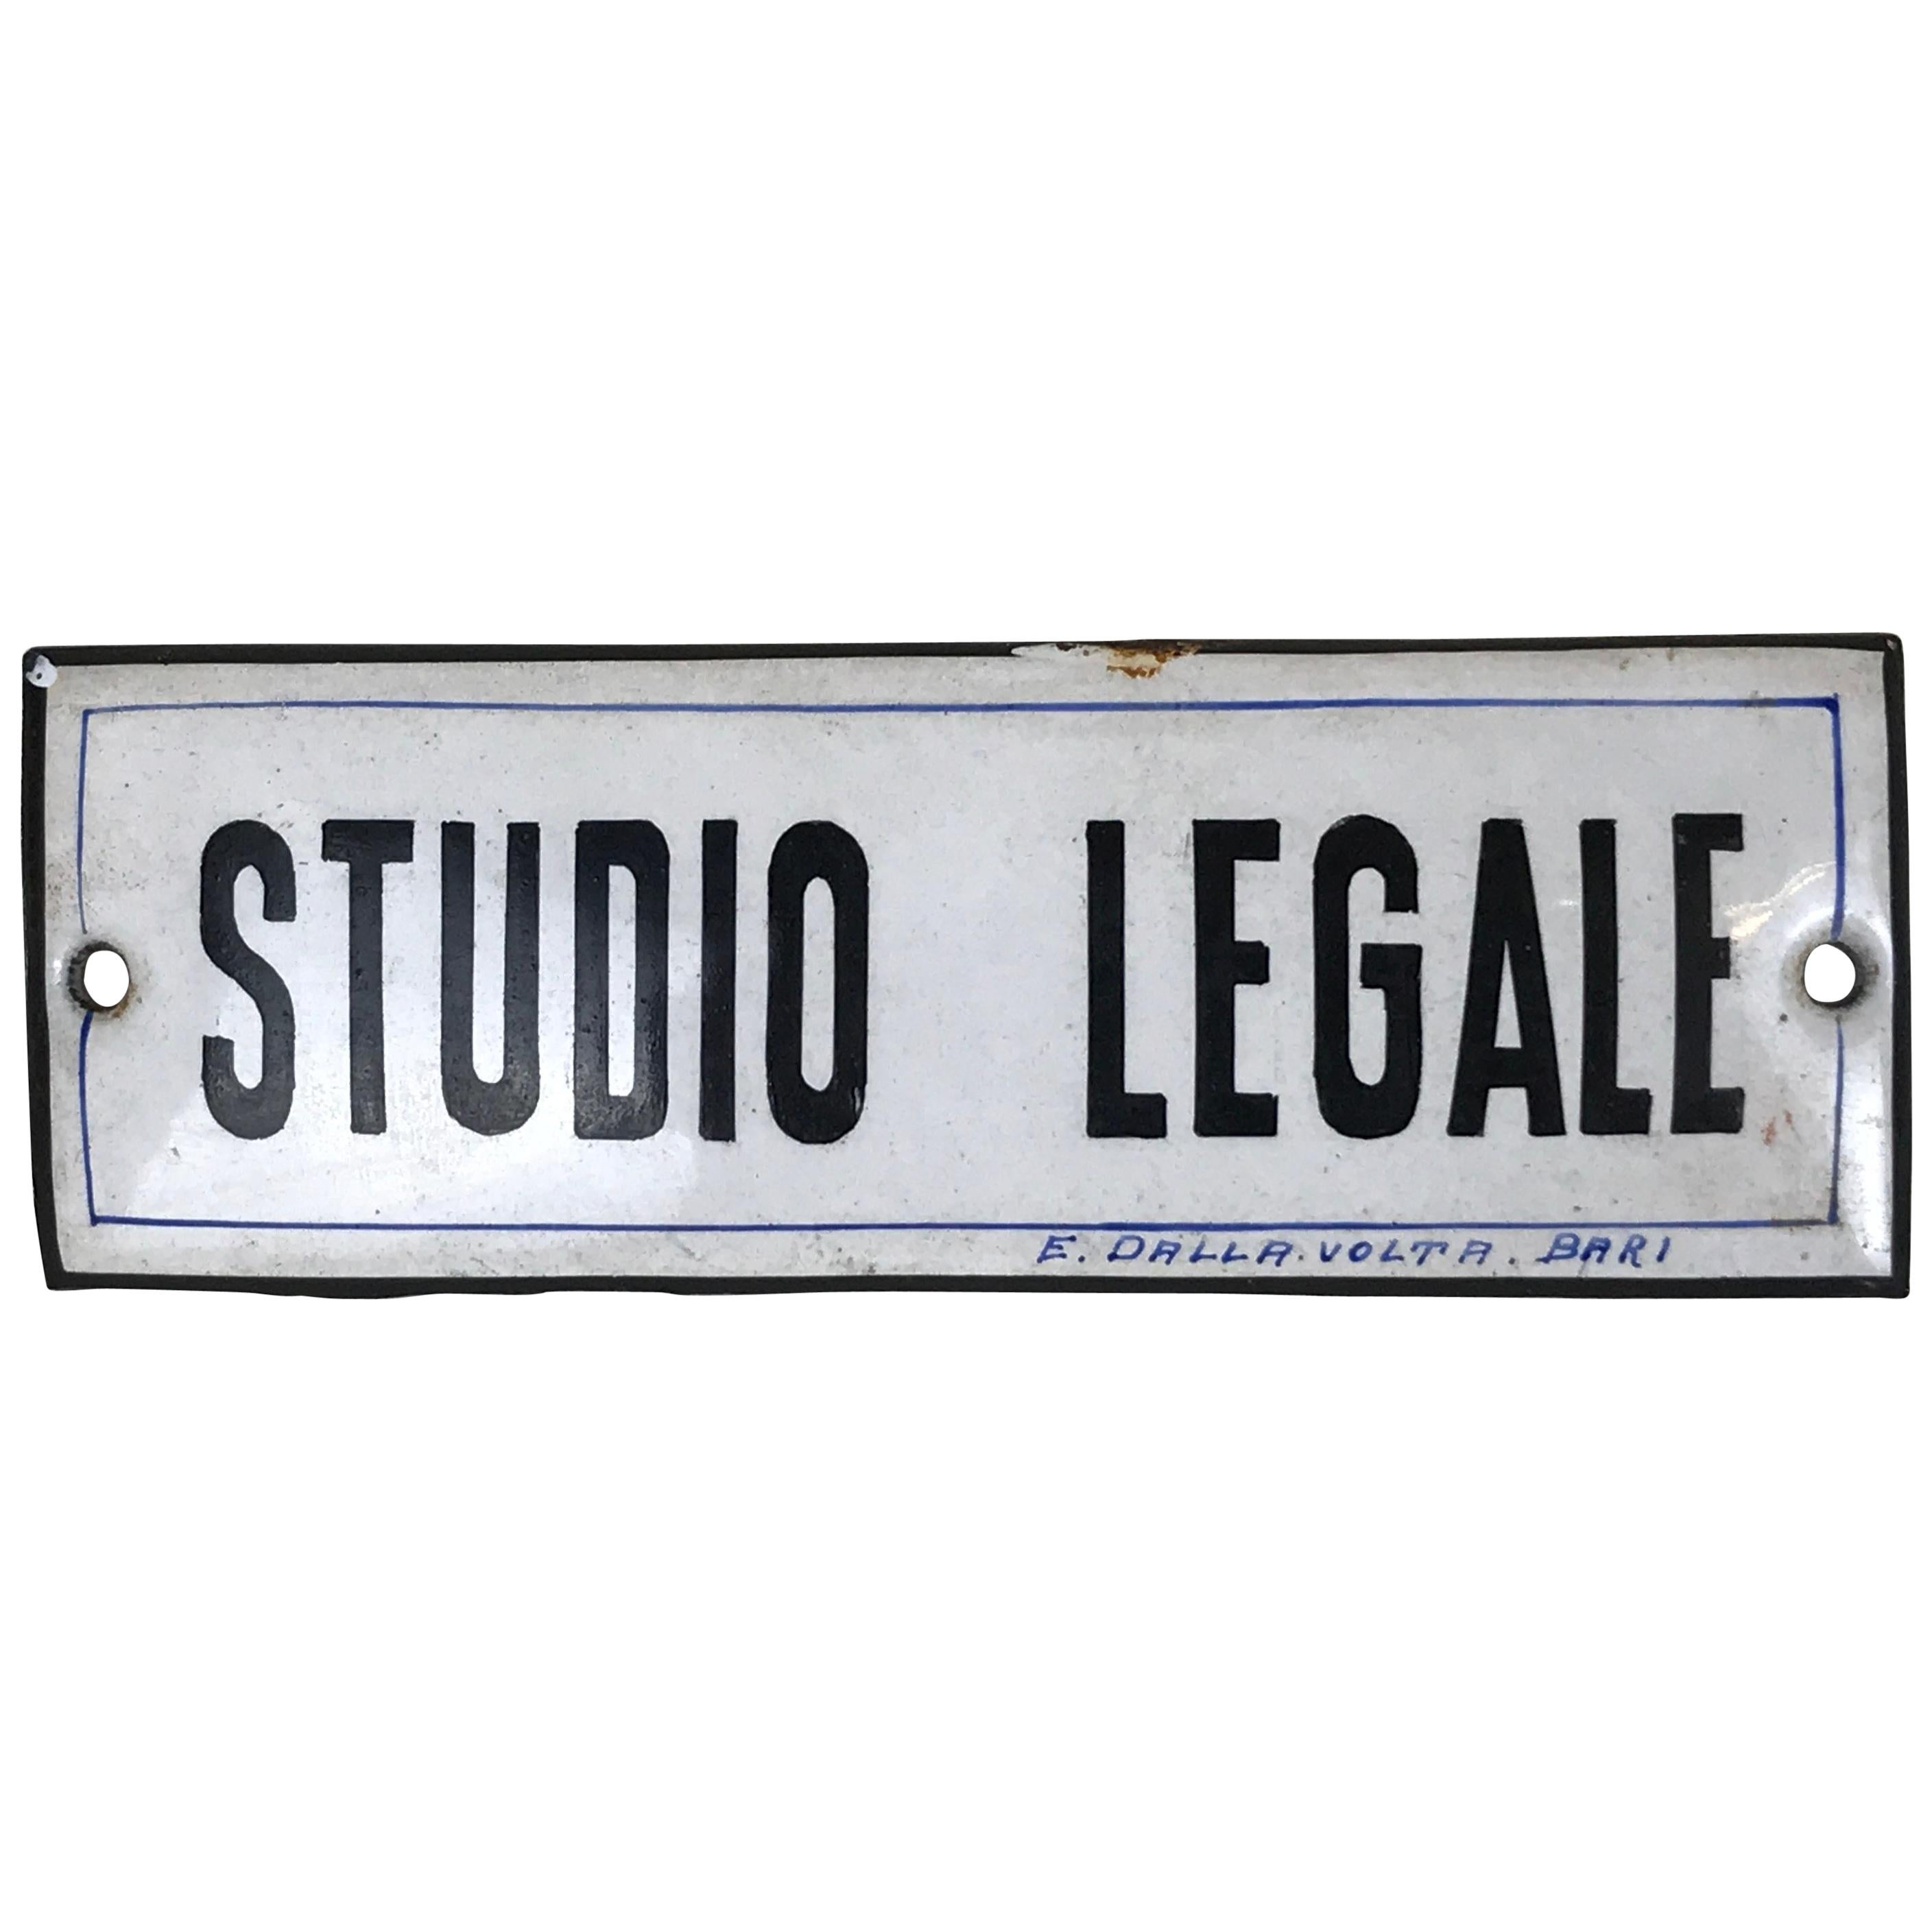 1930s Italian Vintage Small Curved Enamel Metal Law Firm Sign "Studio Legale" For Sale